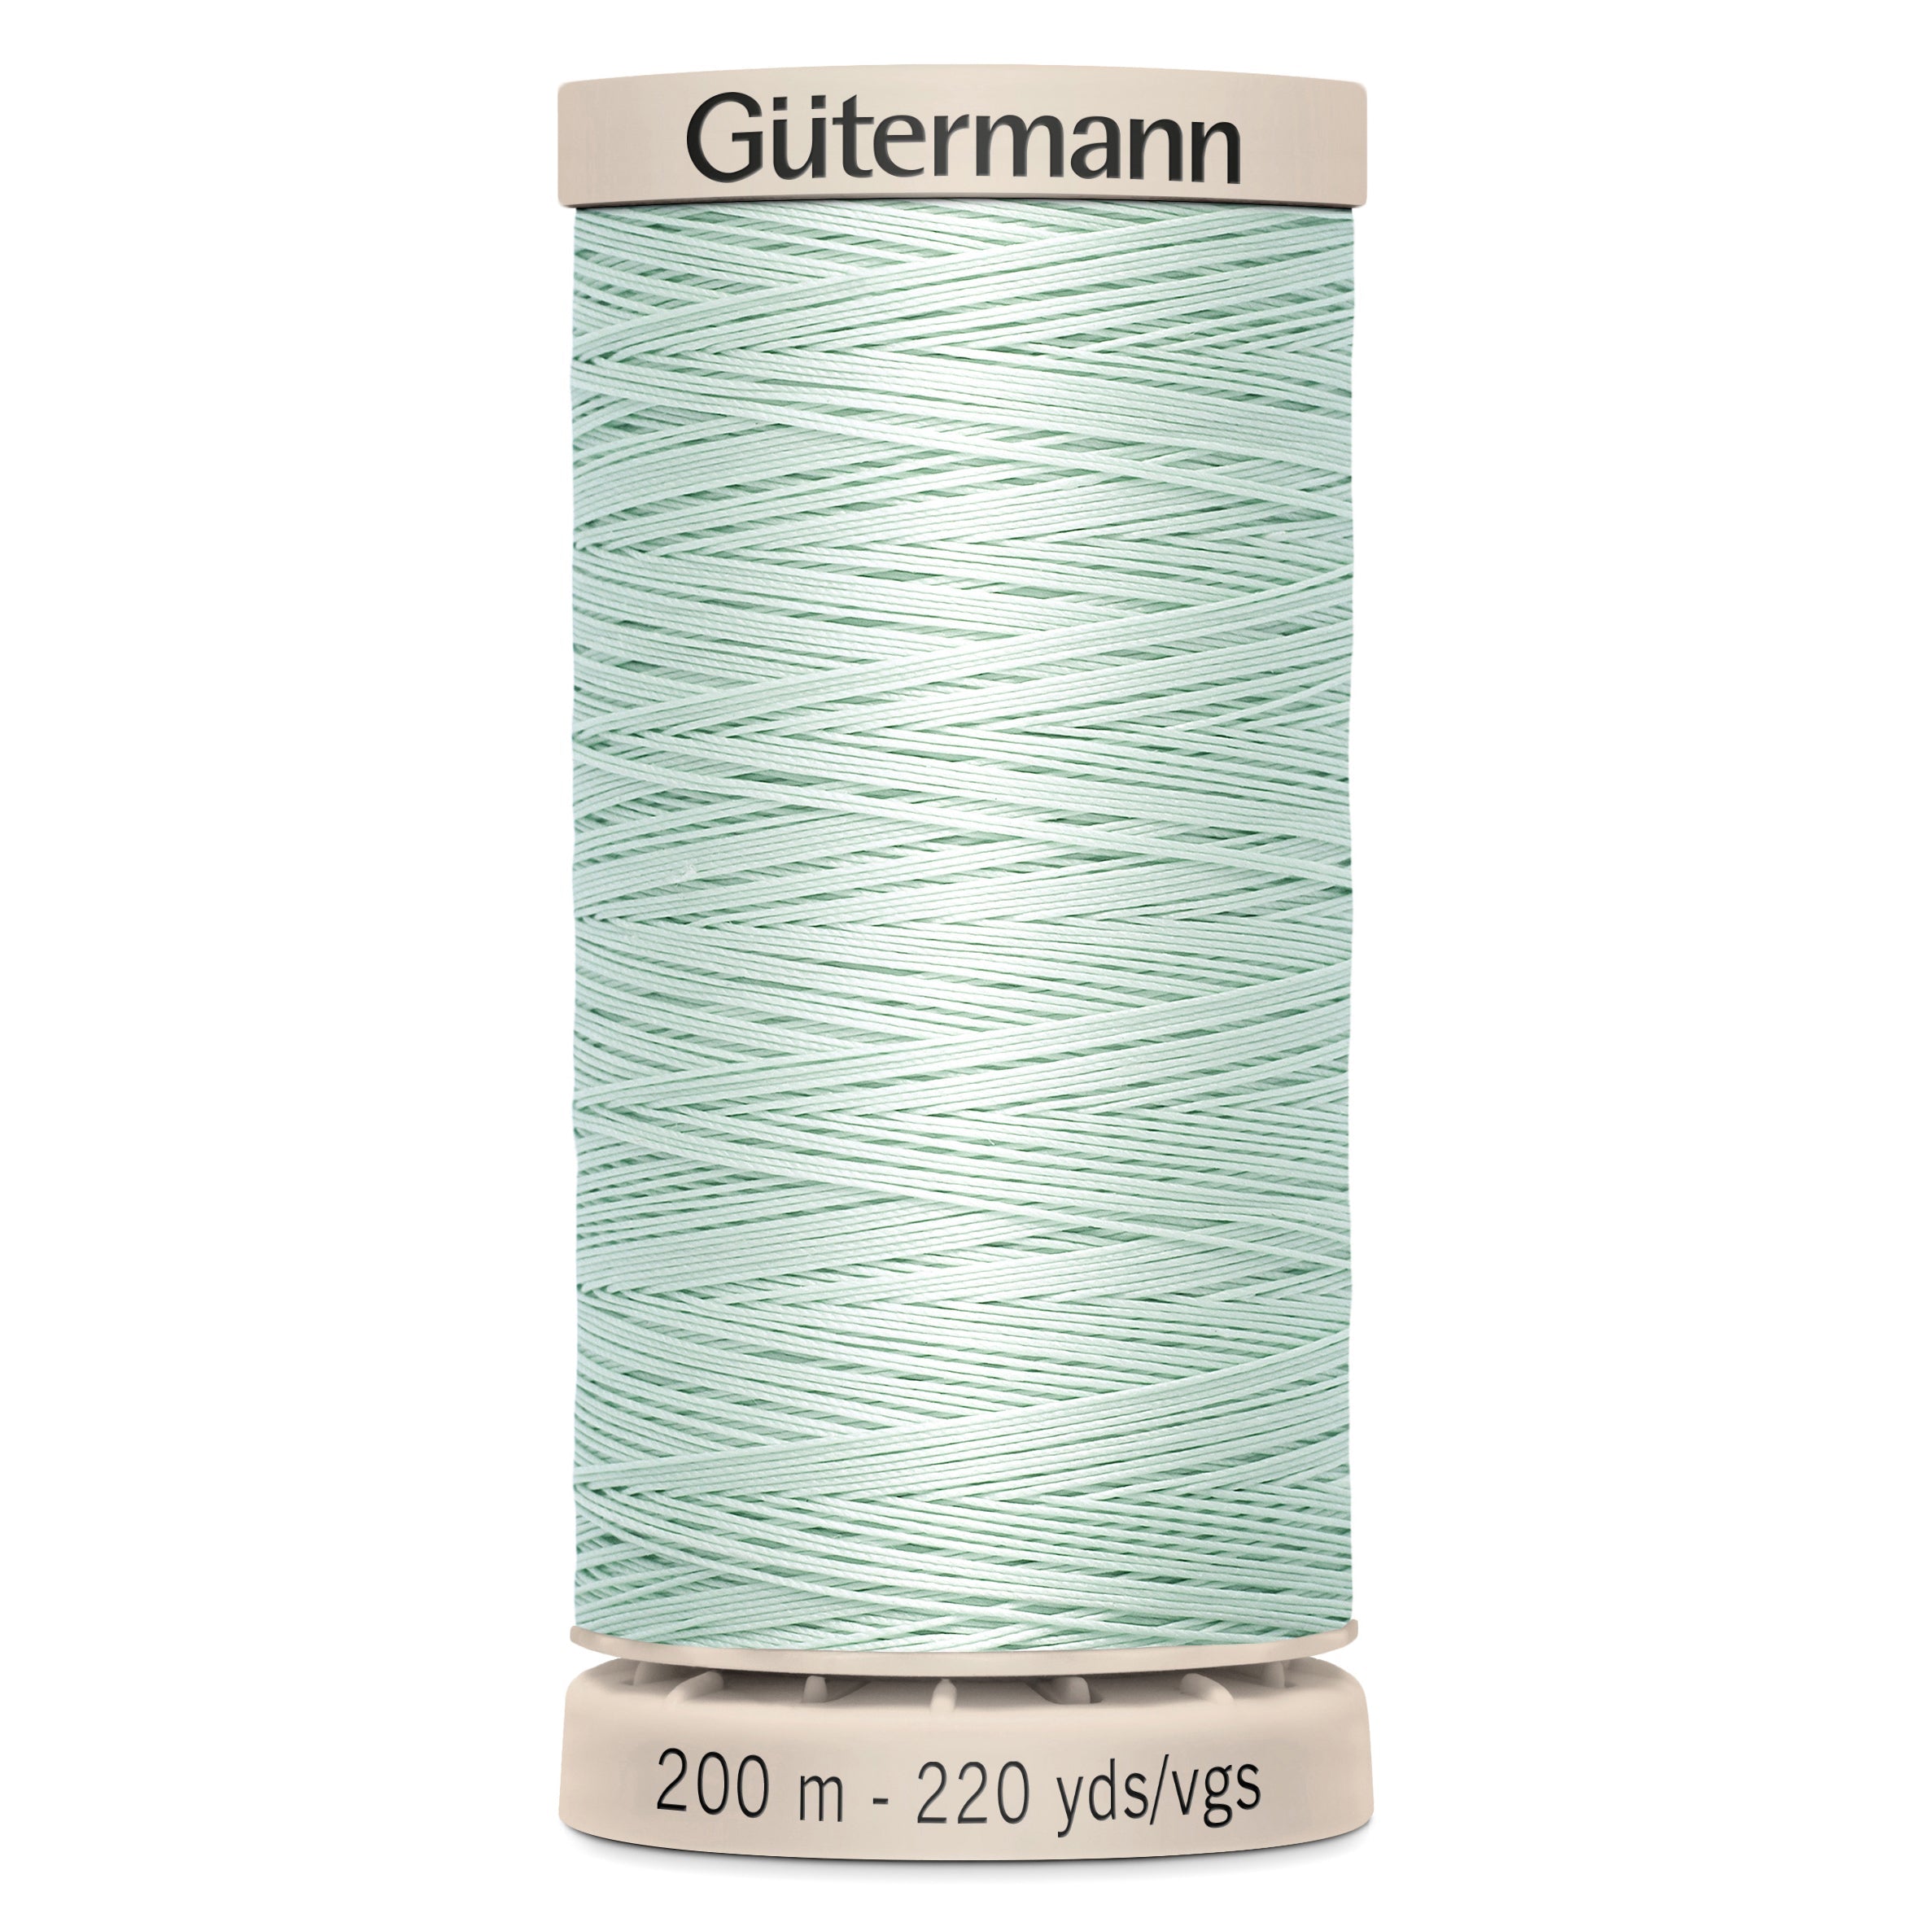 Gutermann Hand Quilting Cotton - 7918 from Jaycotts Sewing Supplies